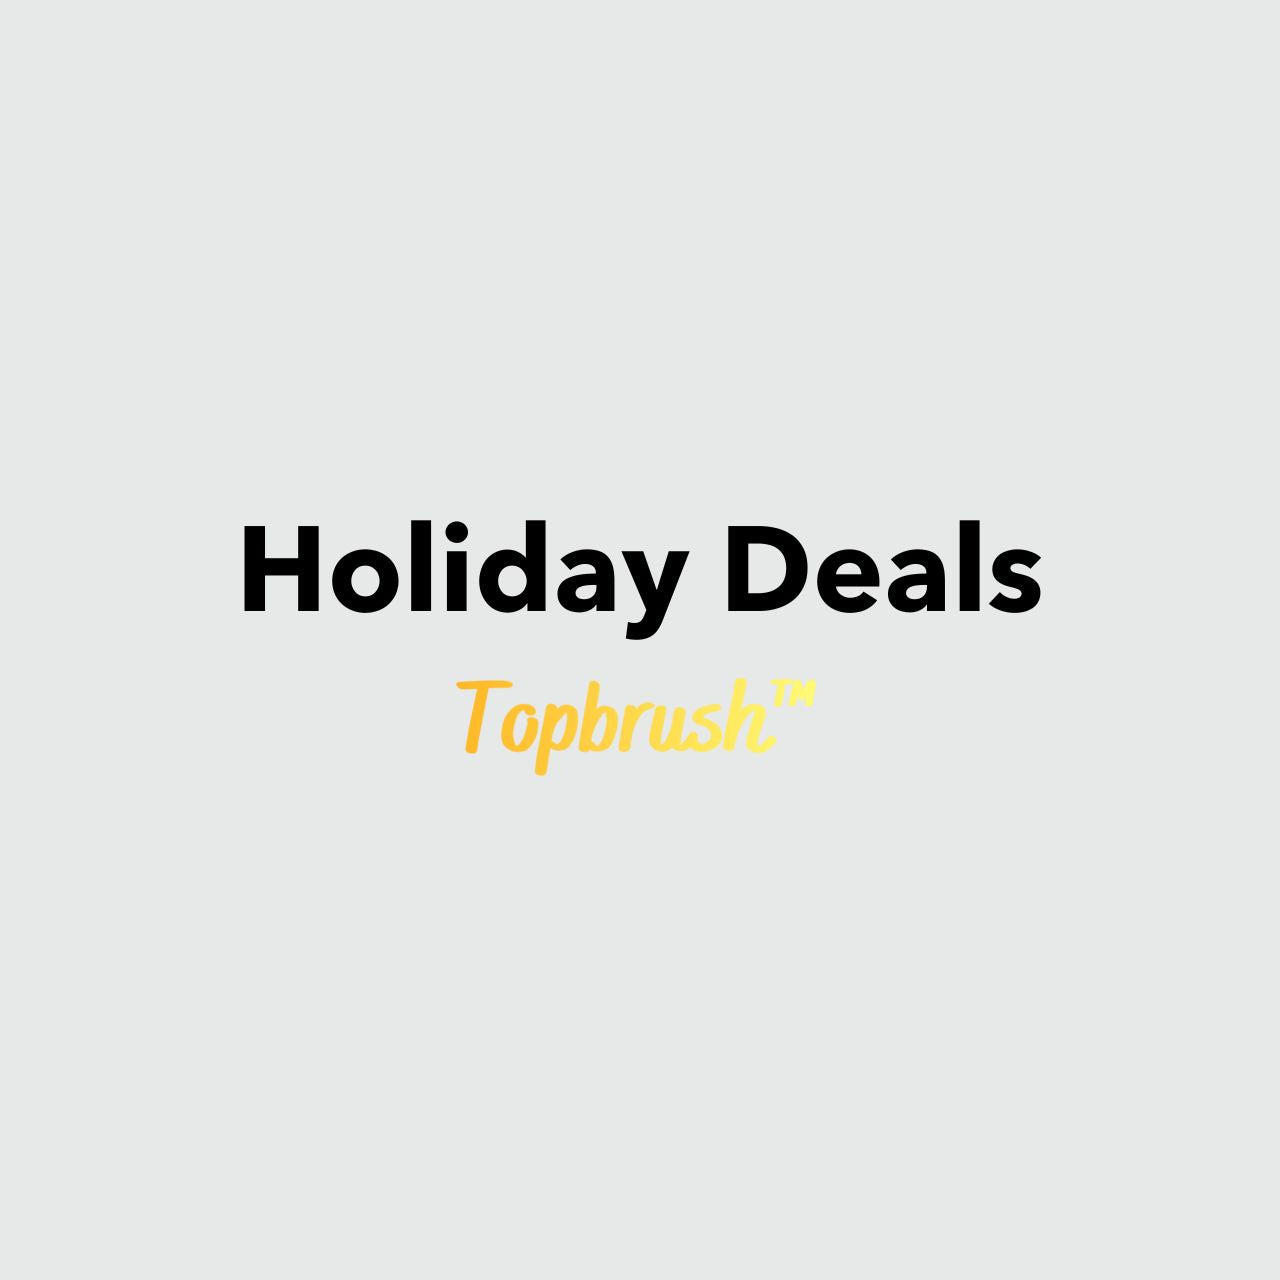 Holiday deals topbrush